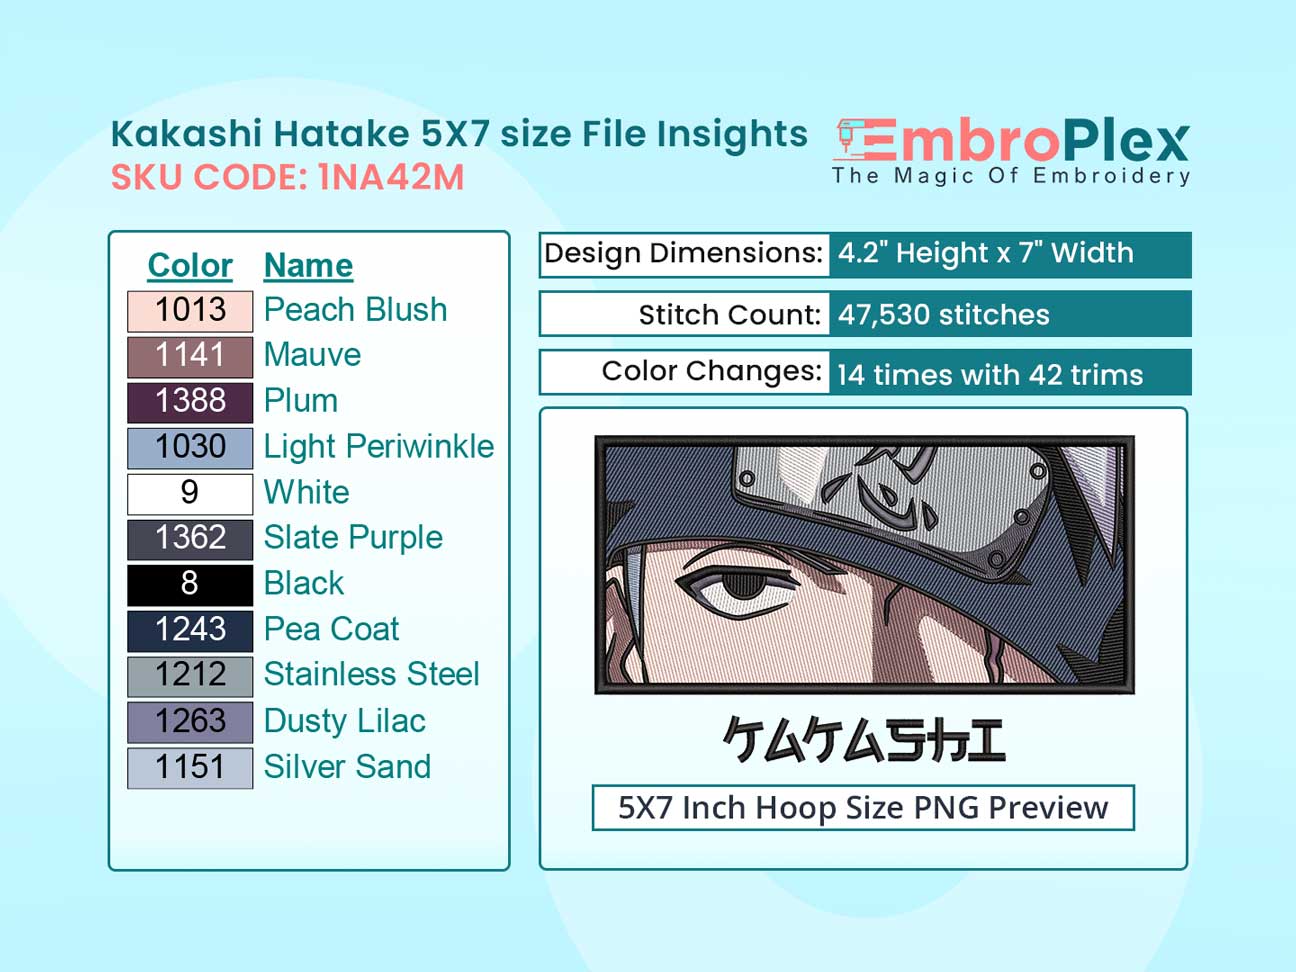 Anime-Inspired Kakashi Hatake Embroidery Design File - 5x7 Inch hoop Size Variation overview image